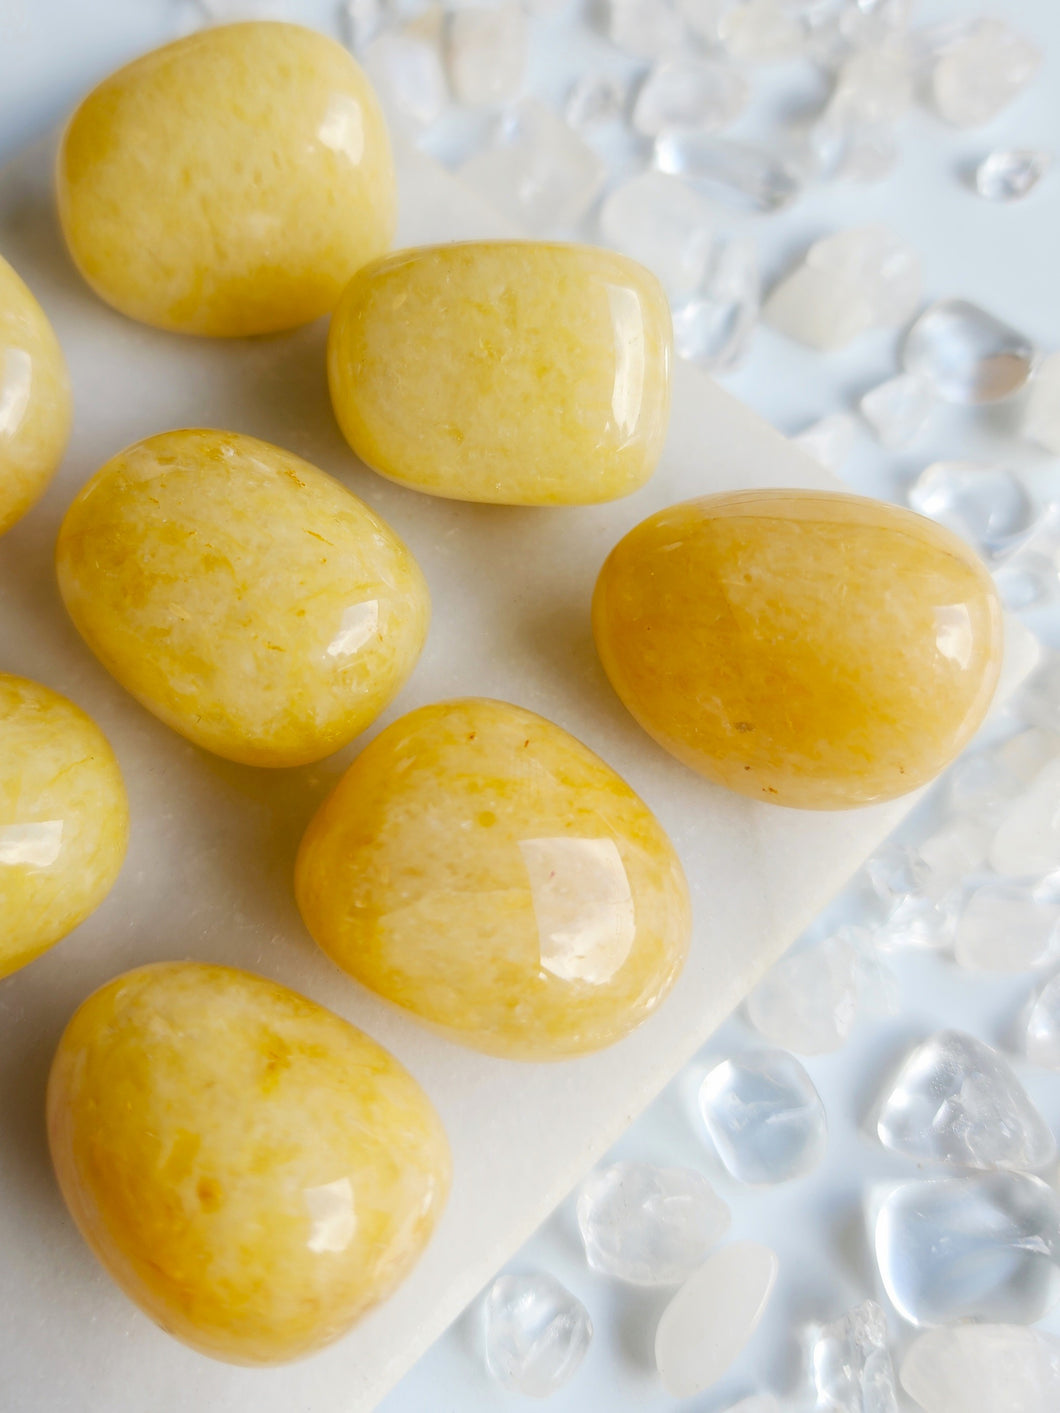 Yellow Aventurine is a spiritual gem known for its ability to bring positivity, abundance, and good luck into your life while dispelling negativity and anxiety, making it an excellent choice for those seeking inner strength and personal growth